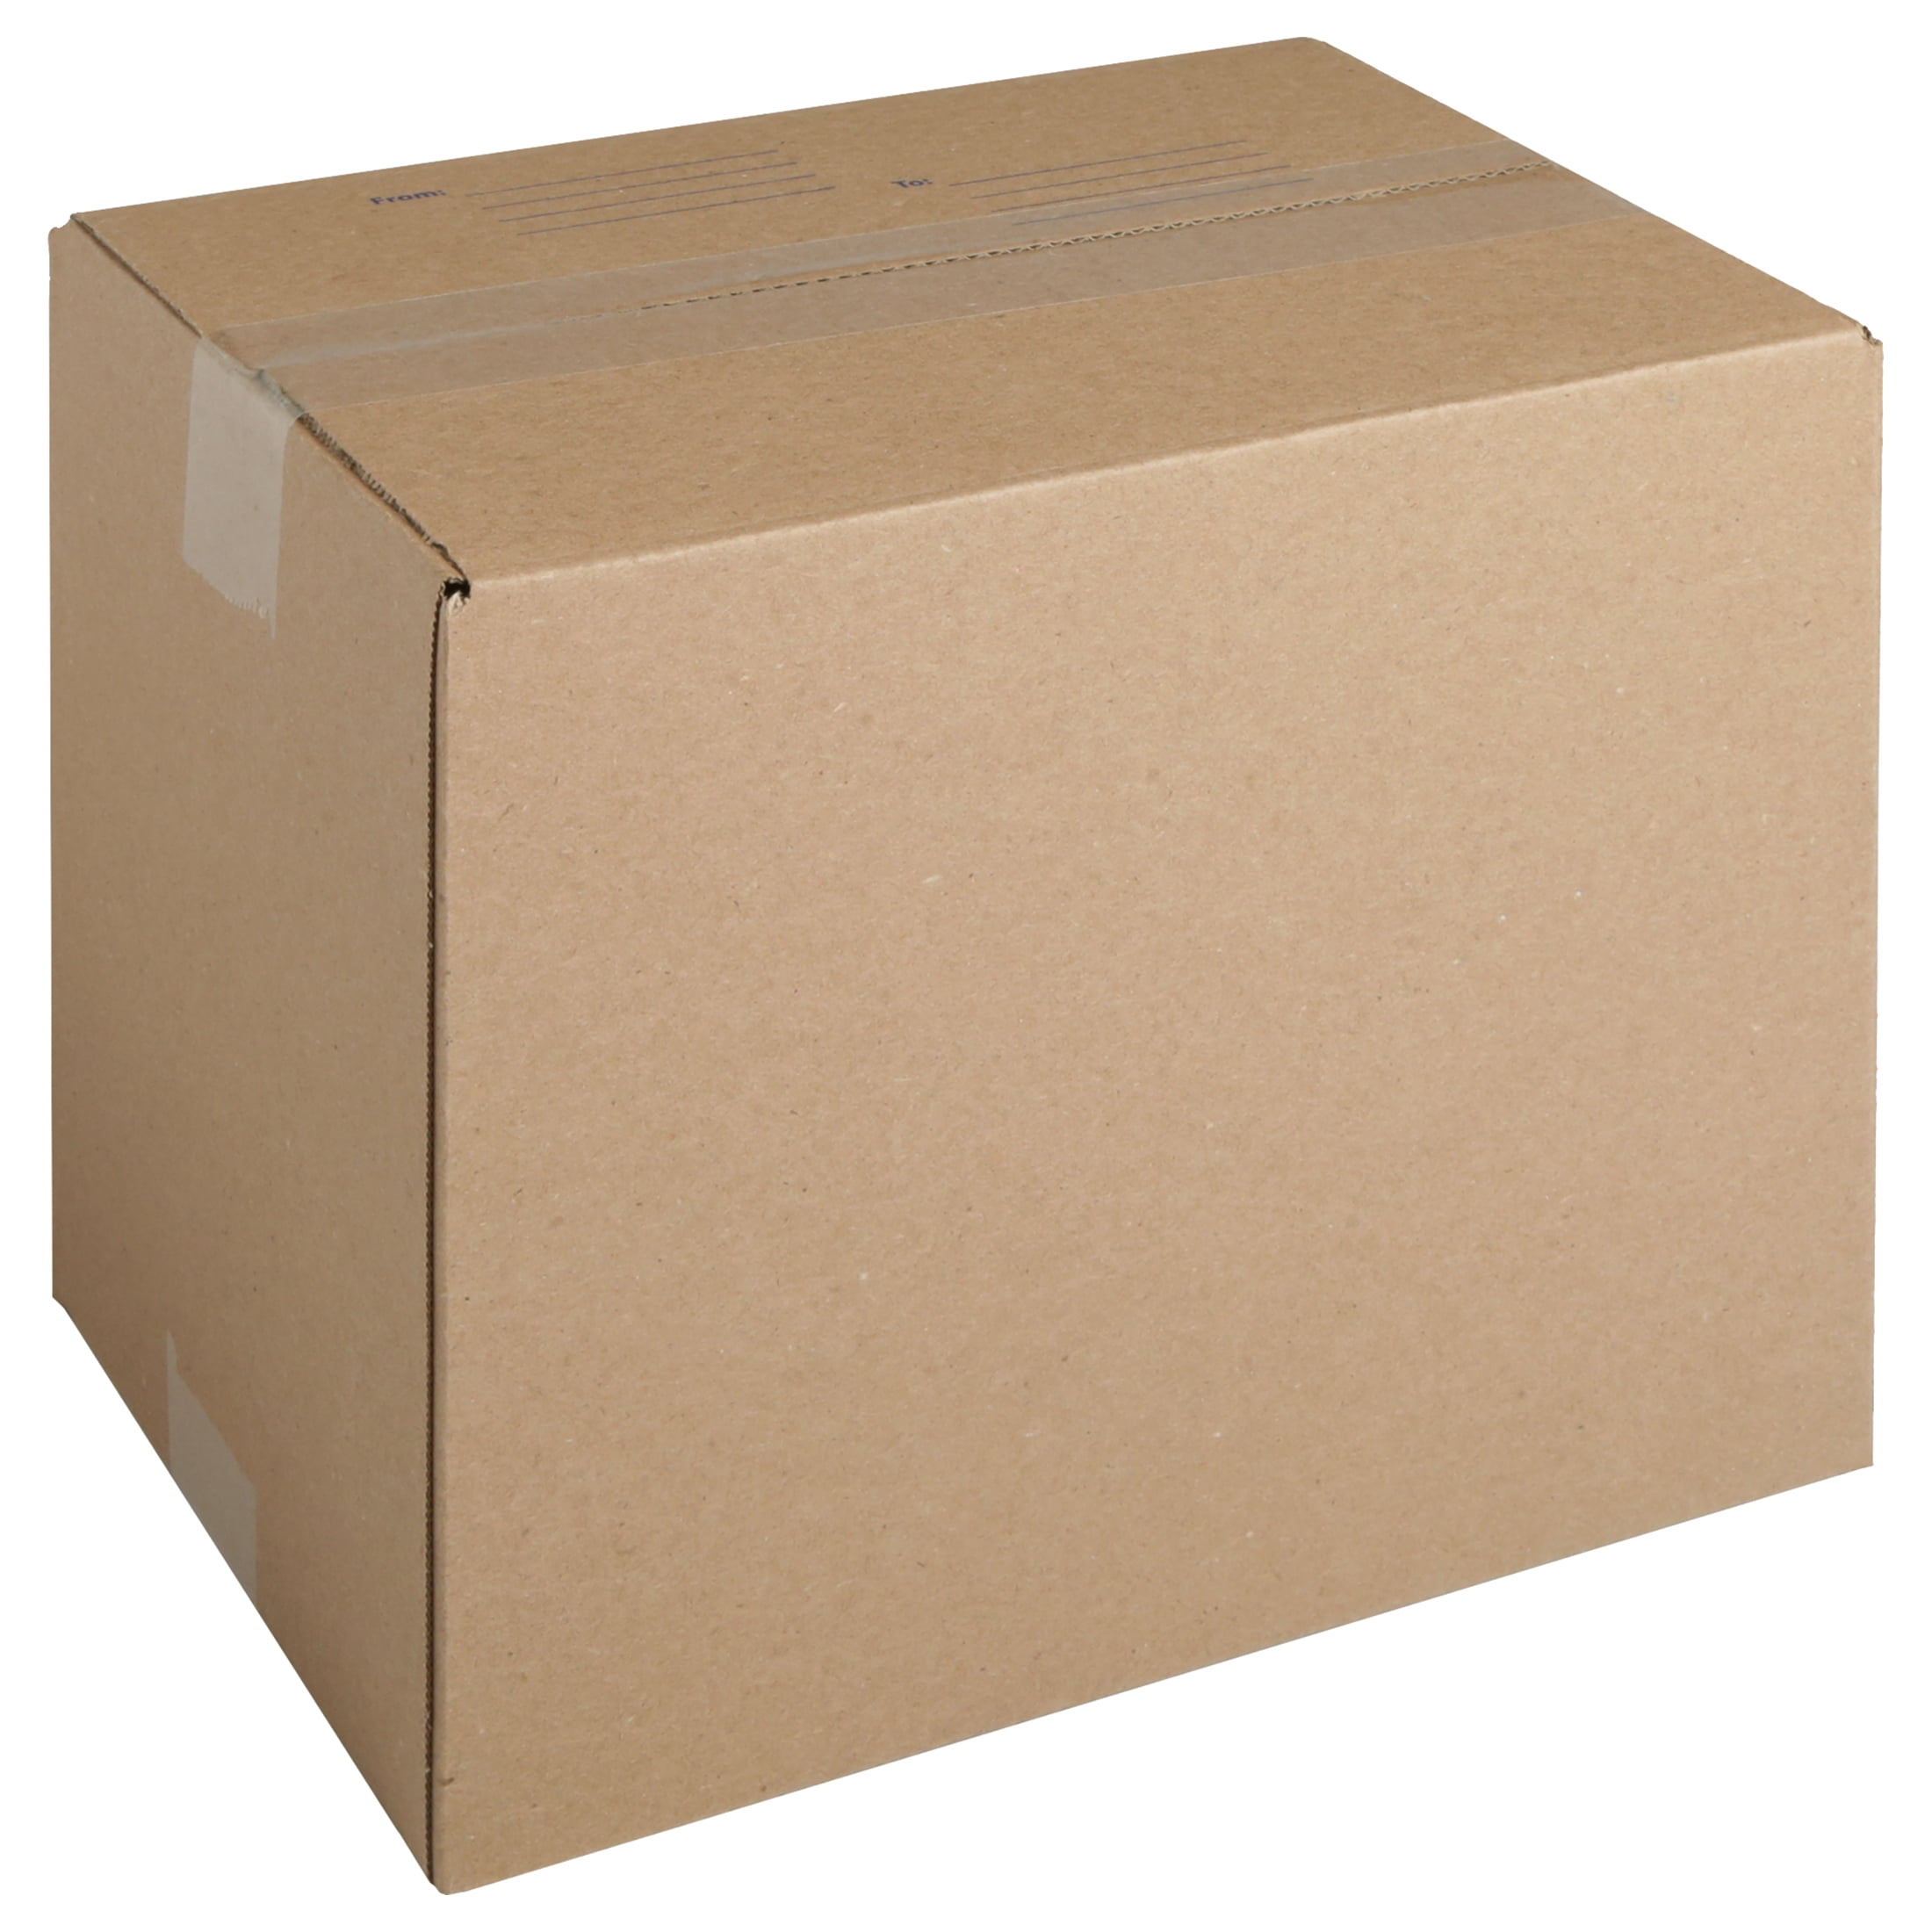 16x13x13 New Corrugated Boxes for Packing or Shipping Needs 32 ECT 